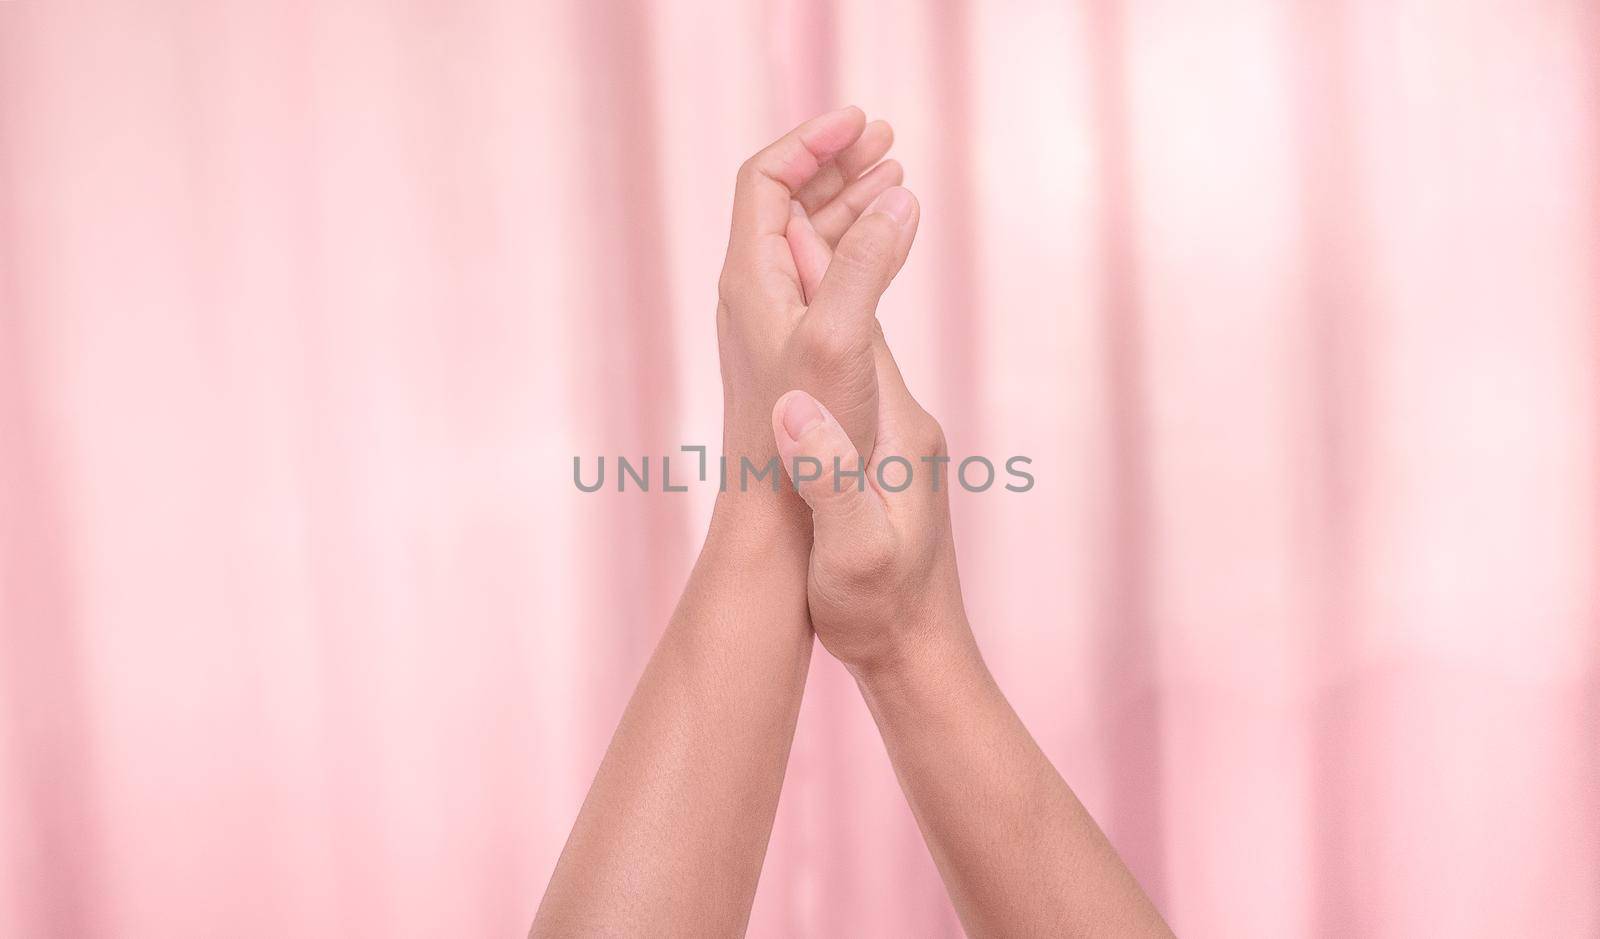 Hands applauding isolated on pink background. Isolated female hands applauding symbol of appreciation. Sign language. by TEERASAK